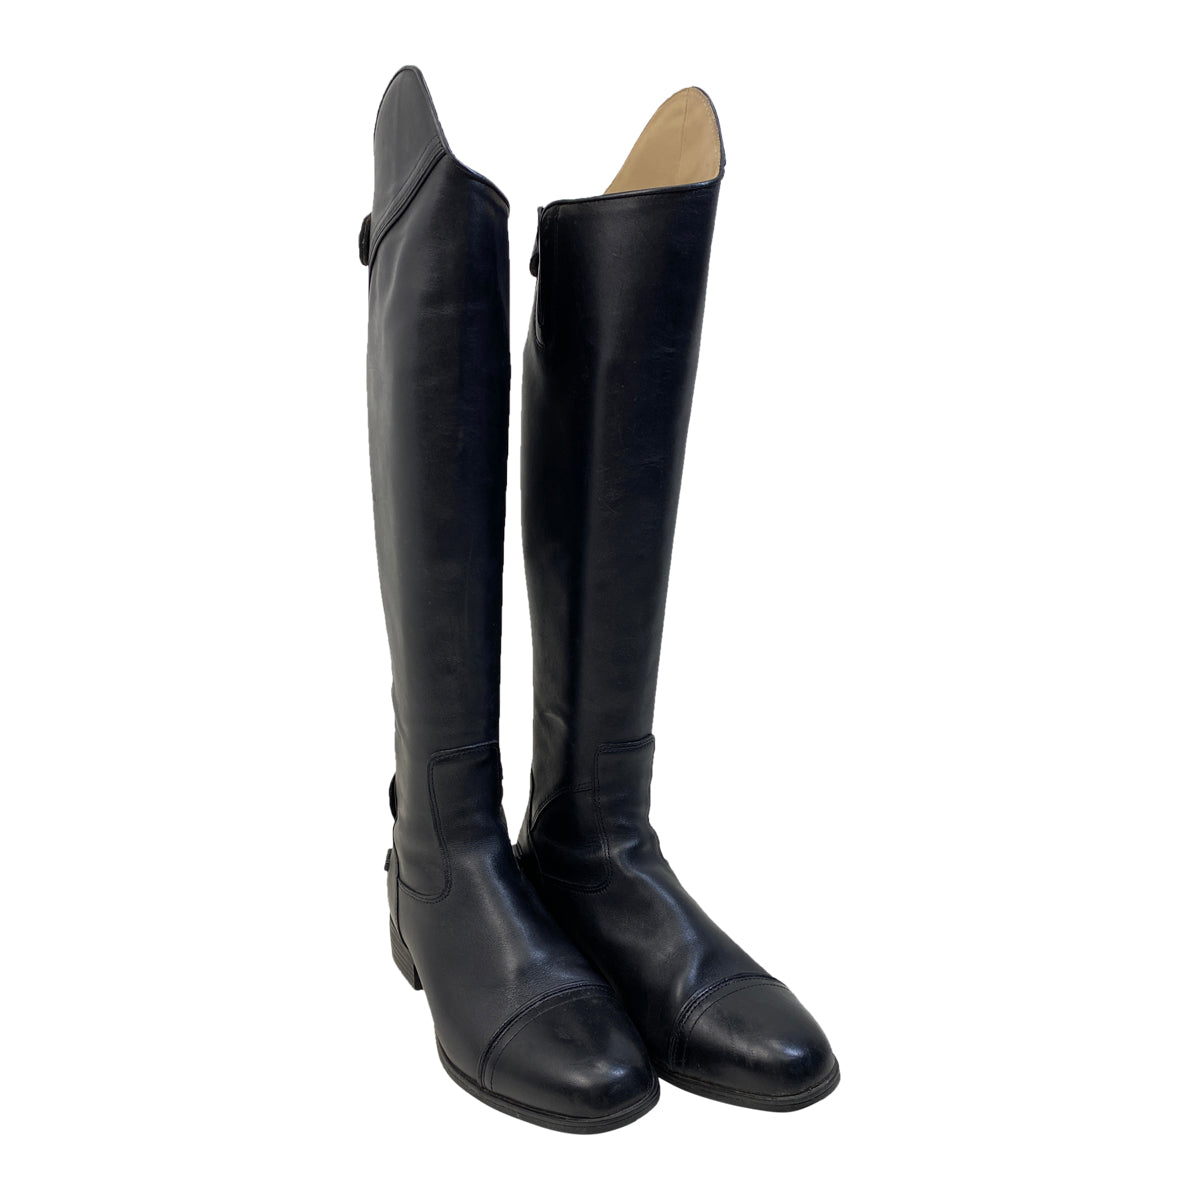 Ariat 'Kinsley' Dress Boots in Black